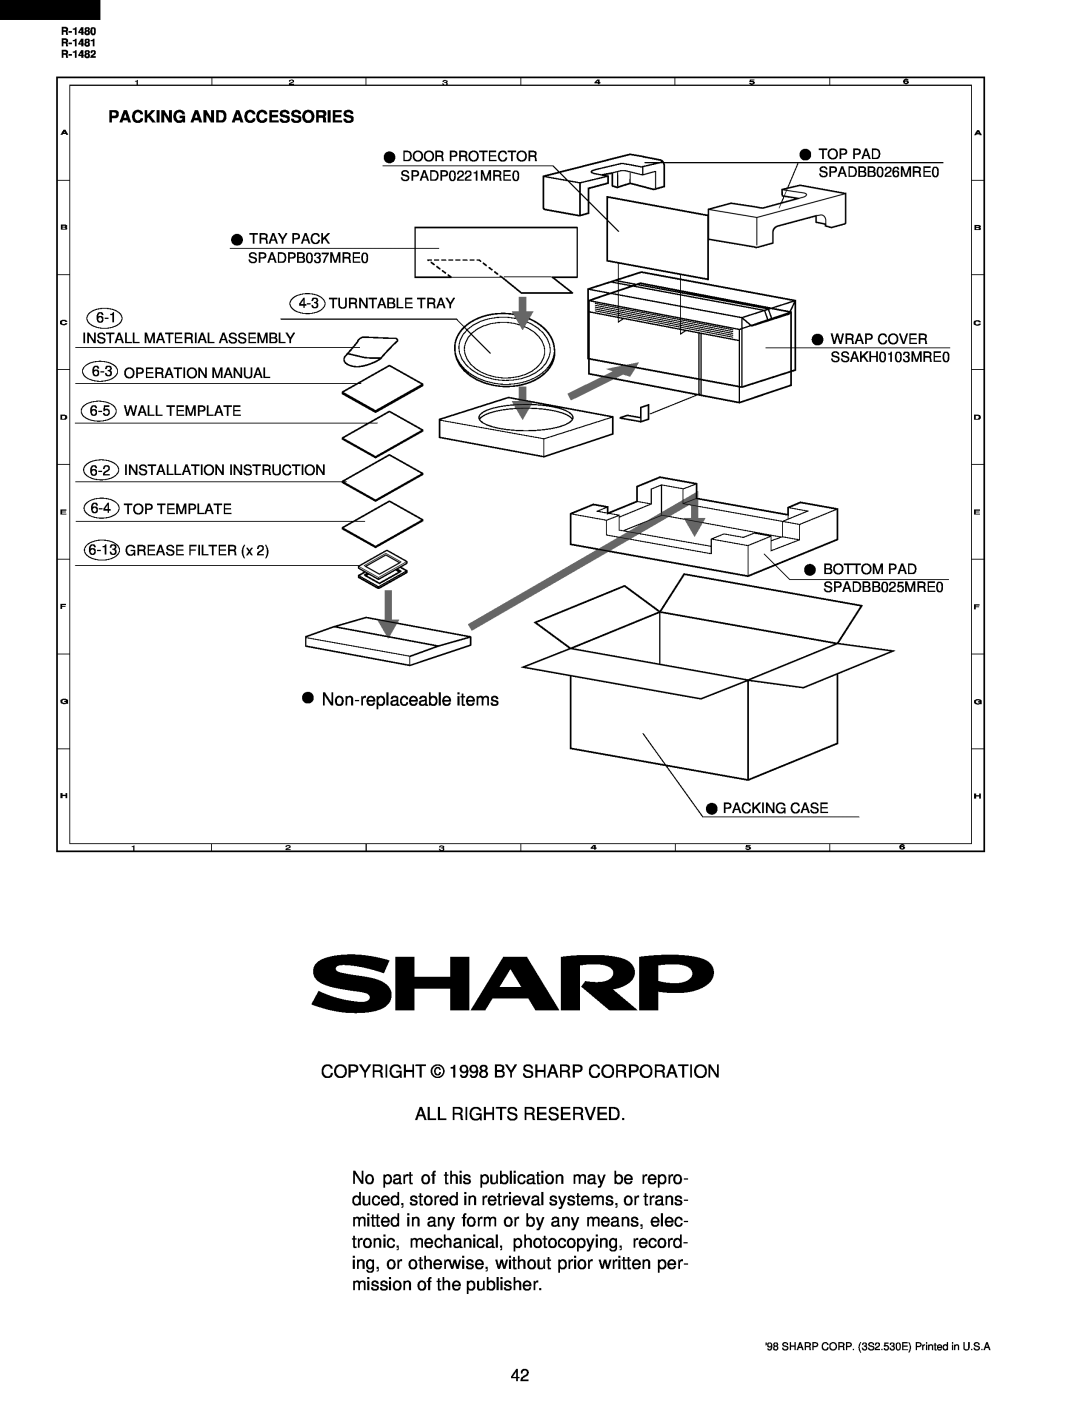 Sharp R-1481, R-1480, R-1482 service manual Packing And Accessories 